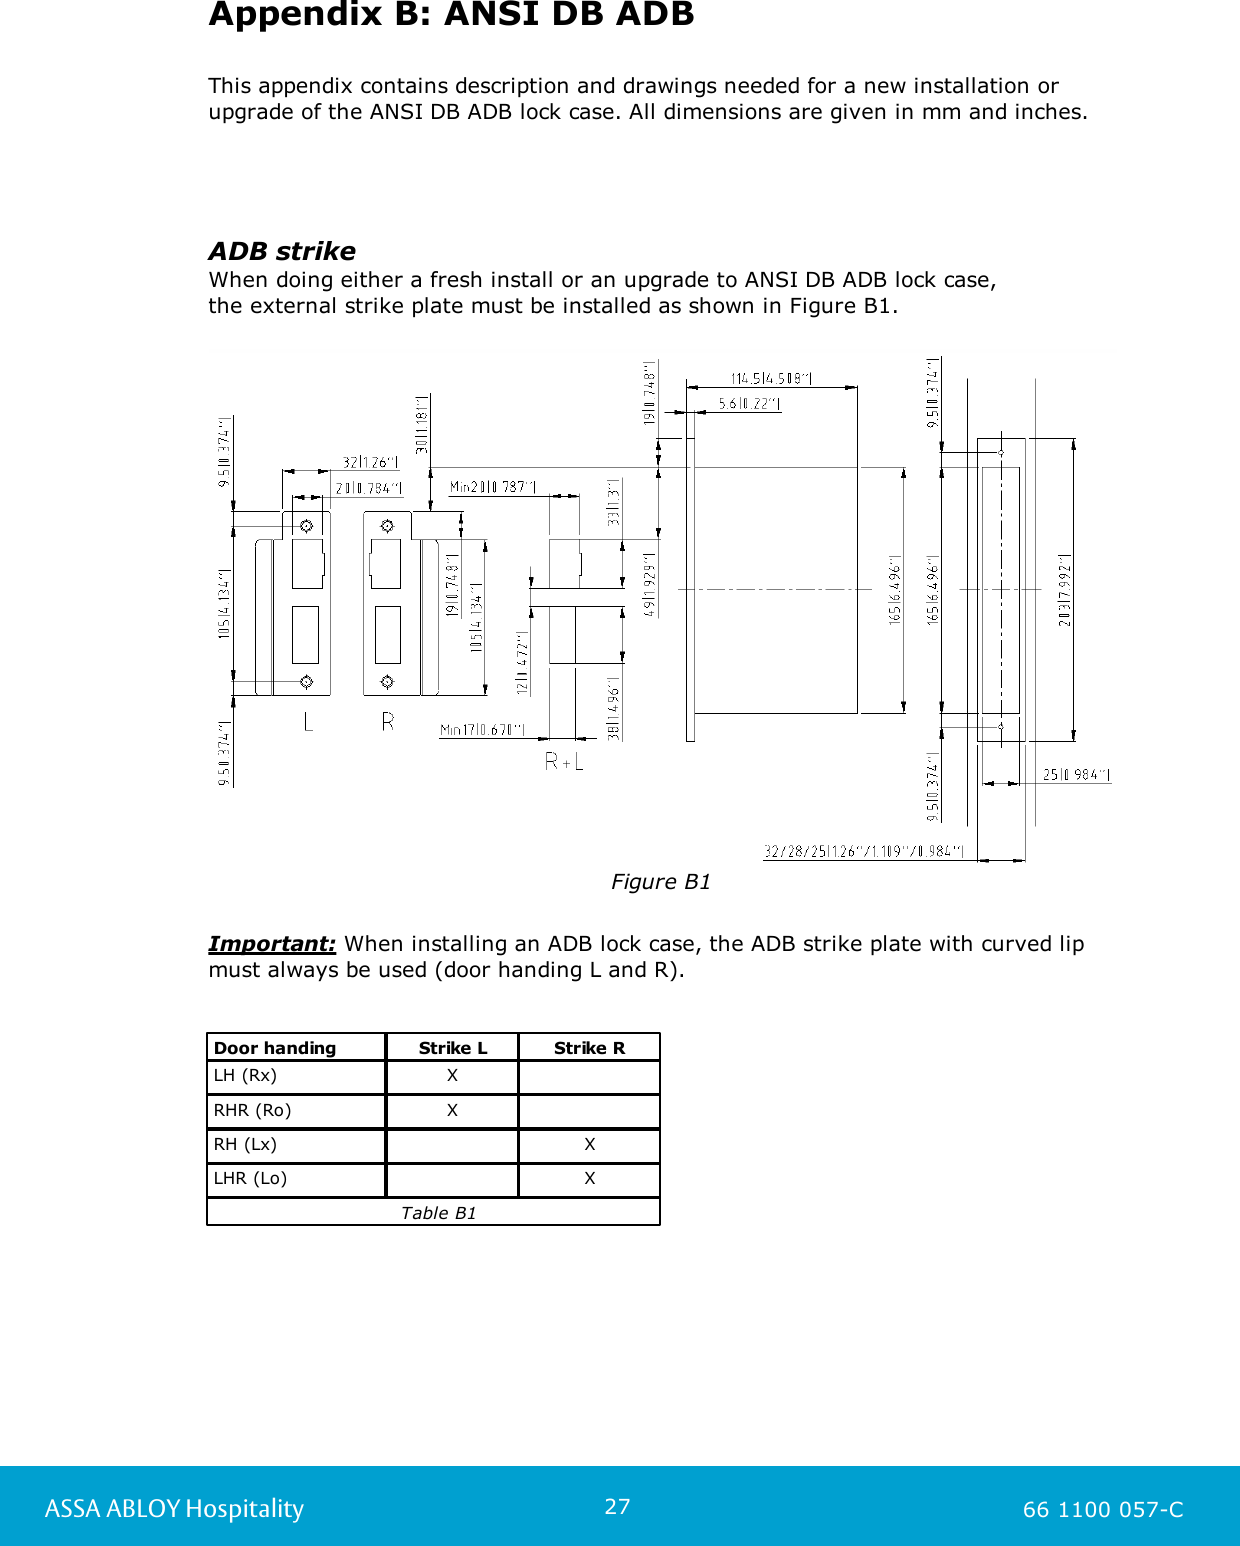 27ASSA ABLOY Hospitality 66 1100 057-CAppendix B: ANSI DB ADBThis appendix contains description and drawings needed for a new installation orupgrade of the ANSI DB ADB lock case. All dimensions are given in mm and inches.ADB strikeWhen doing either a fresh install or an upgrade to ANSI DB ADB lock case, the external strike plate must be installed as shown in Figure B1.Figure B1Important: When installing an ADB lock case, the ADB strike plate with curved lipmust always be used (door handing L and R).Door handingStrike LStrike RLH (Rx)XRHR (Ro)XRH (Lx)XLHR (Lo)X                              Table B1